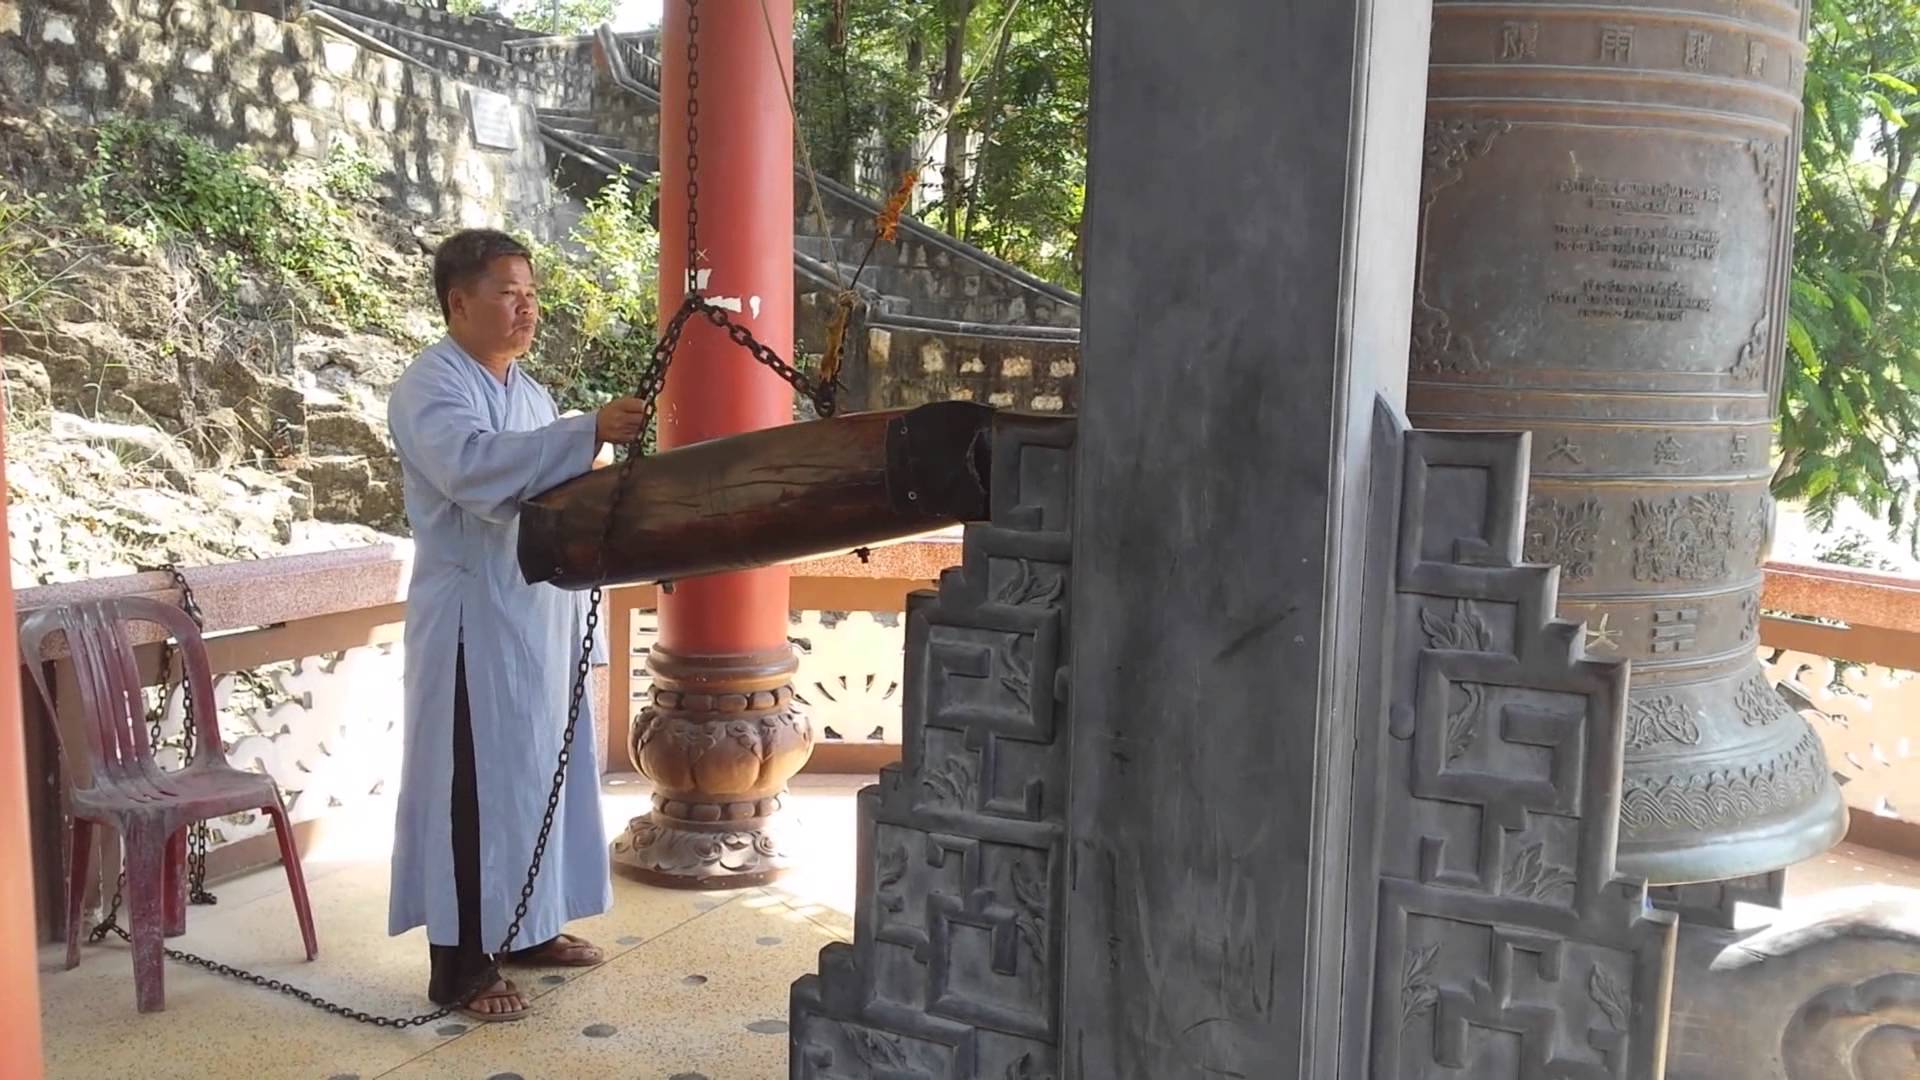 Buddhist Temple Bell in Nha Trang, Vietnam - YouTube